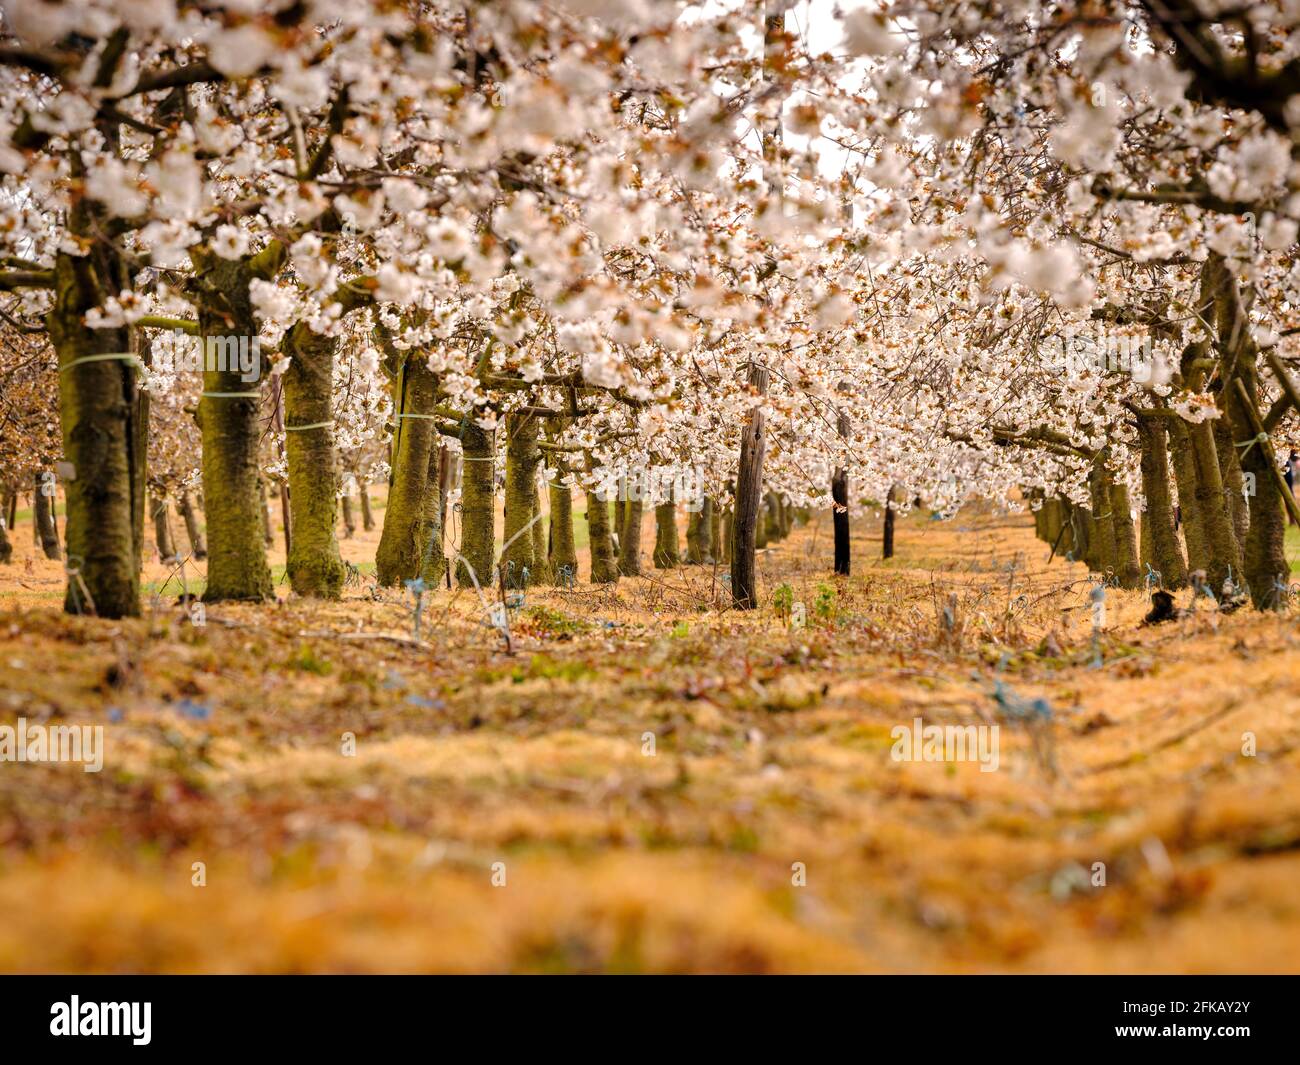 Orchard cherry blossom in springtime at Cooks Yard Farm in Northiam, East Sussex, UK Stock Photo